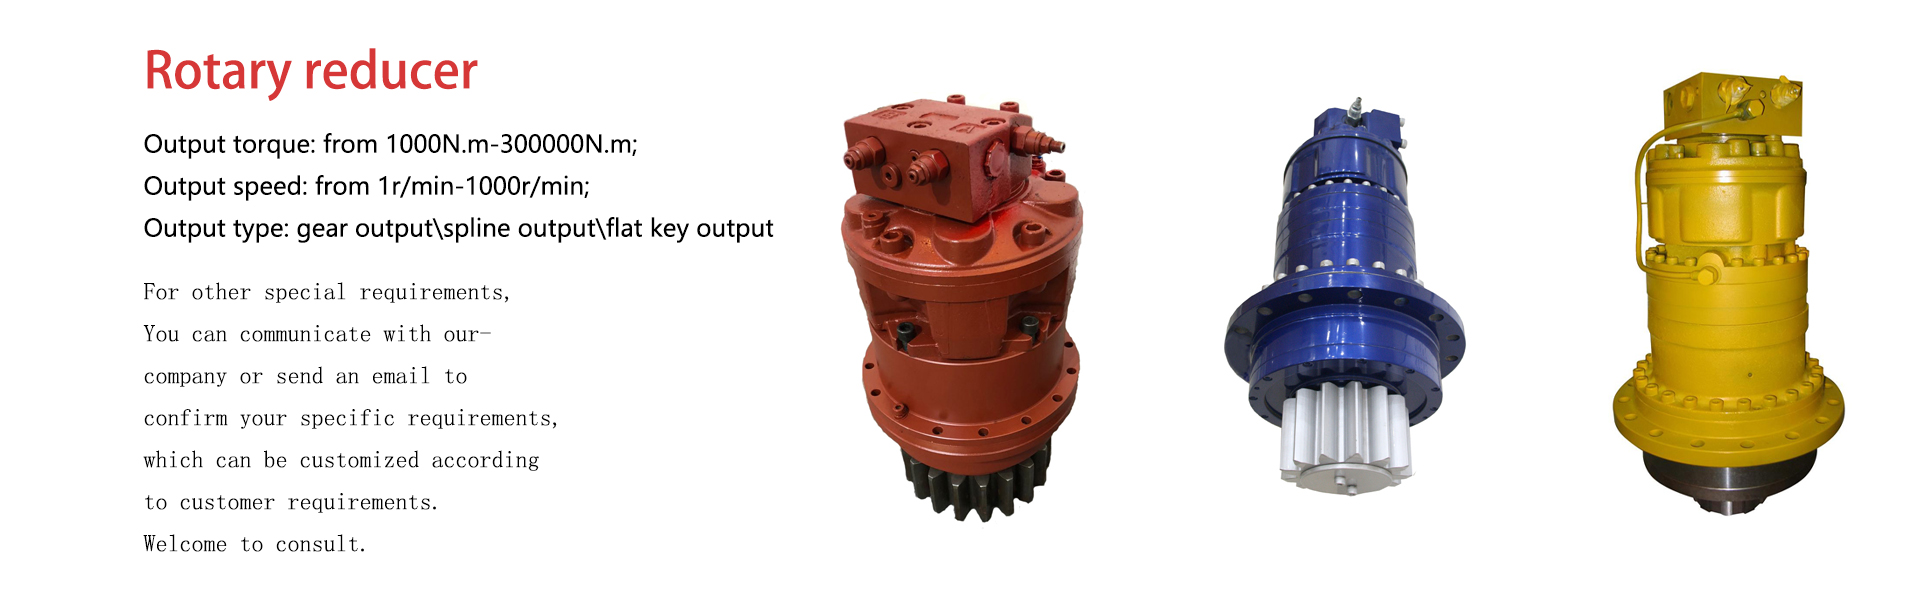 reductor, motor hidráulico, engranaje,Changsha Zhuo Cheng transmission equipment technology CO.,LTD